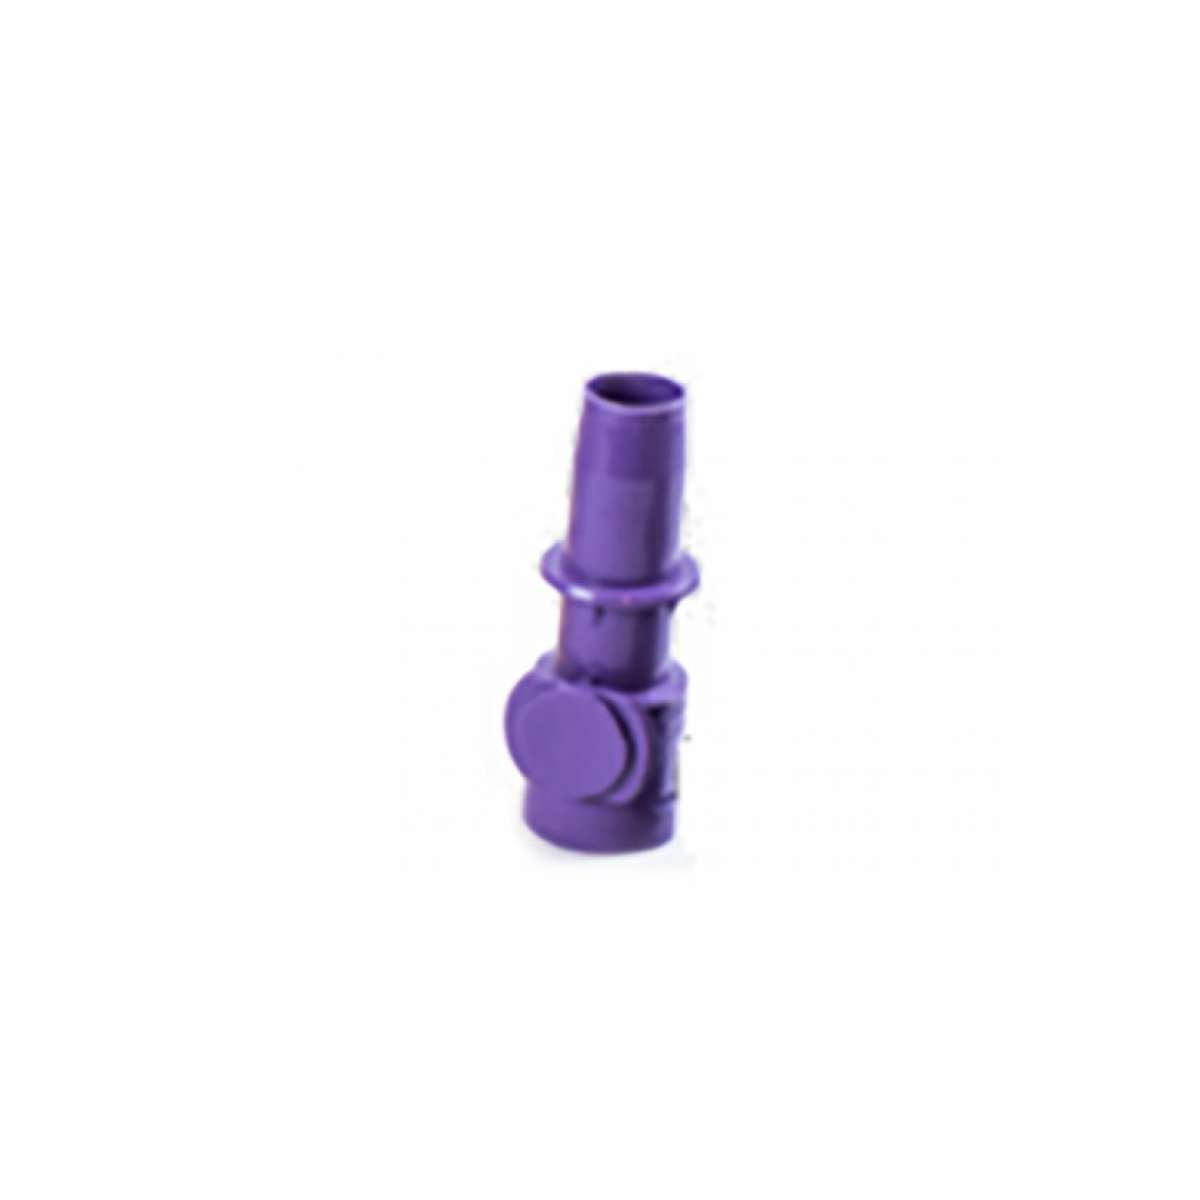 IsoLink 5" Rigid Spout with 1" Tip - Purple